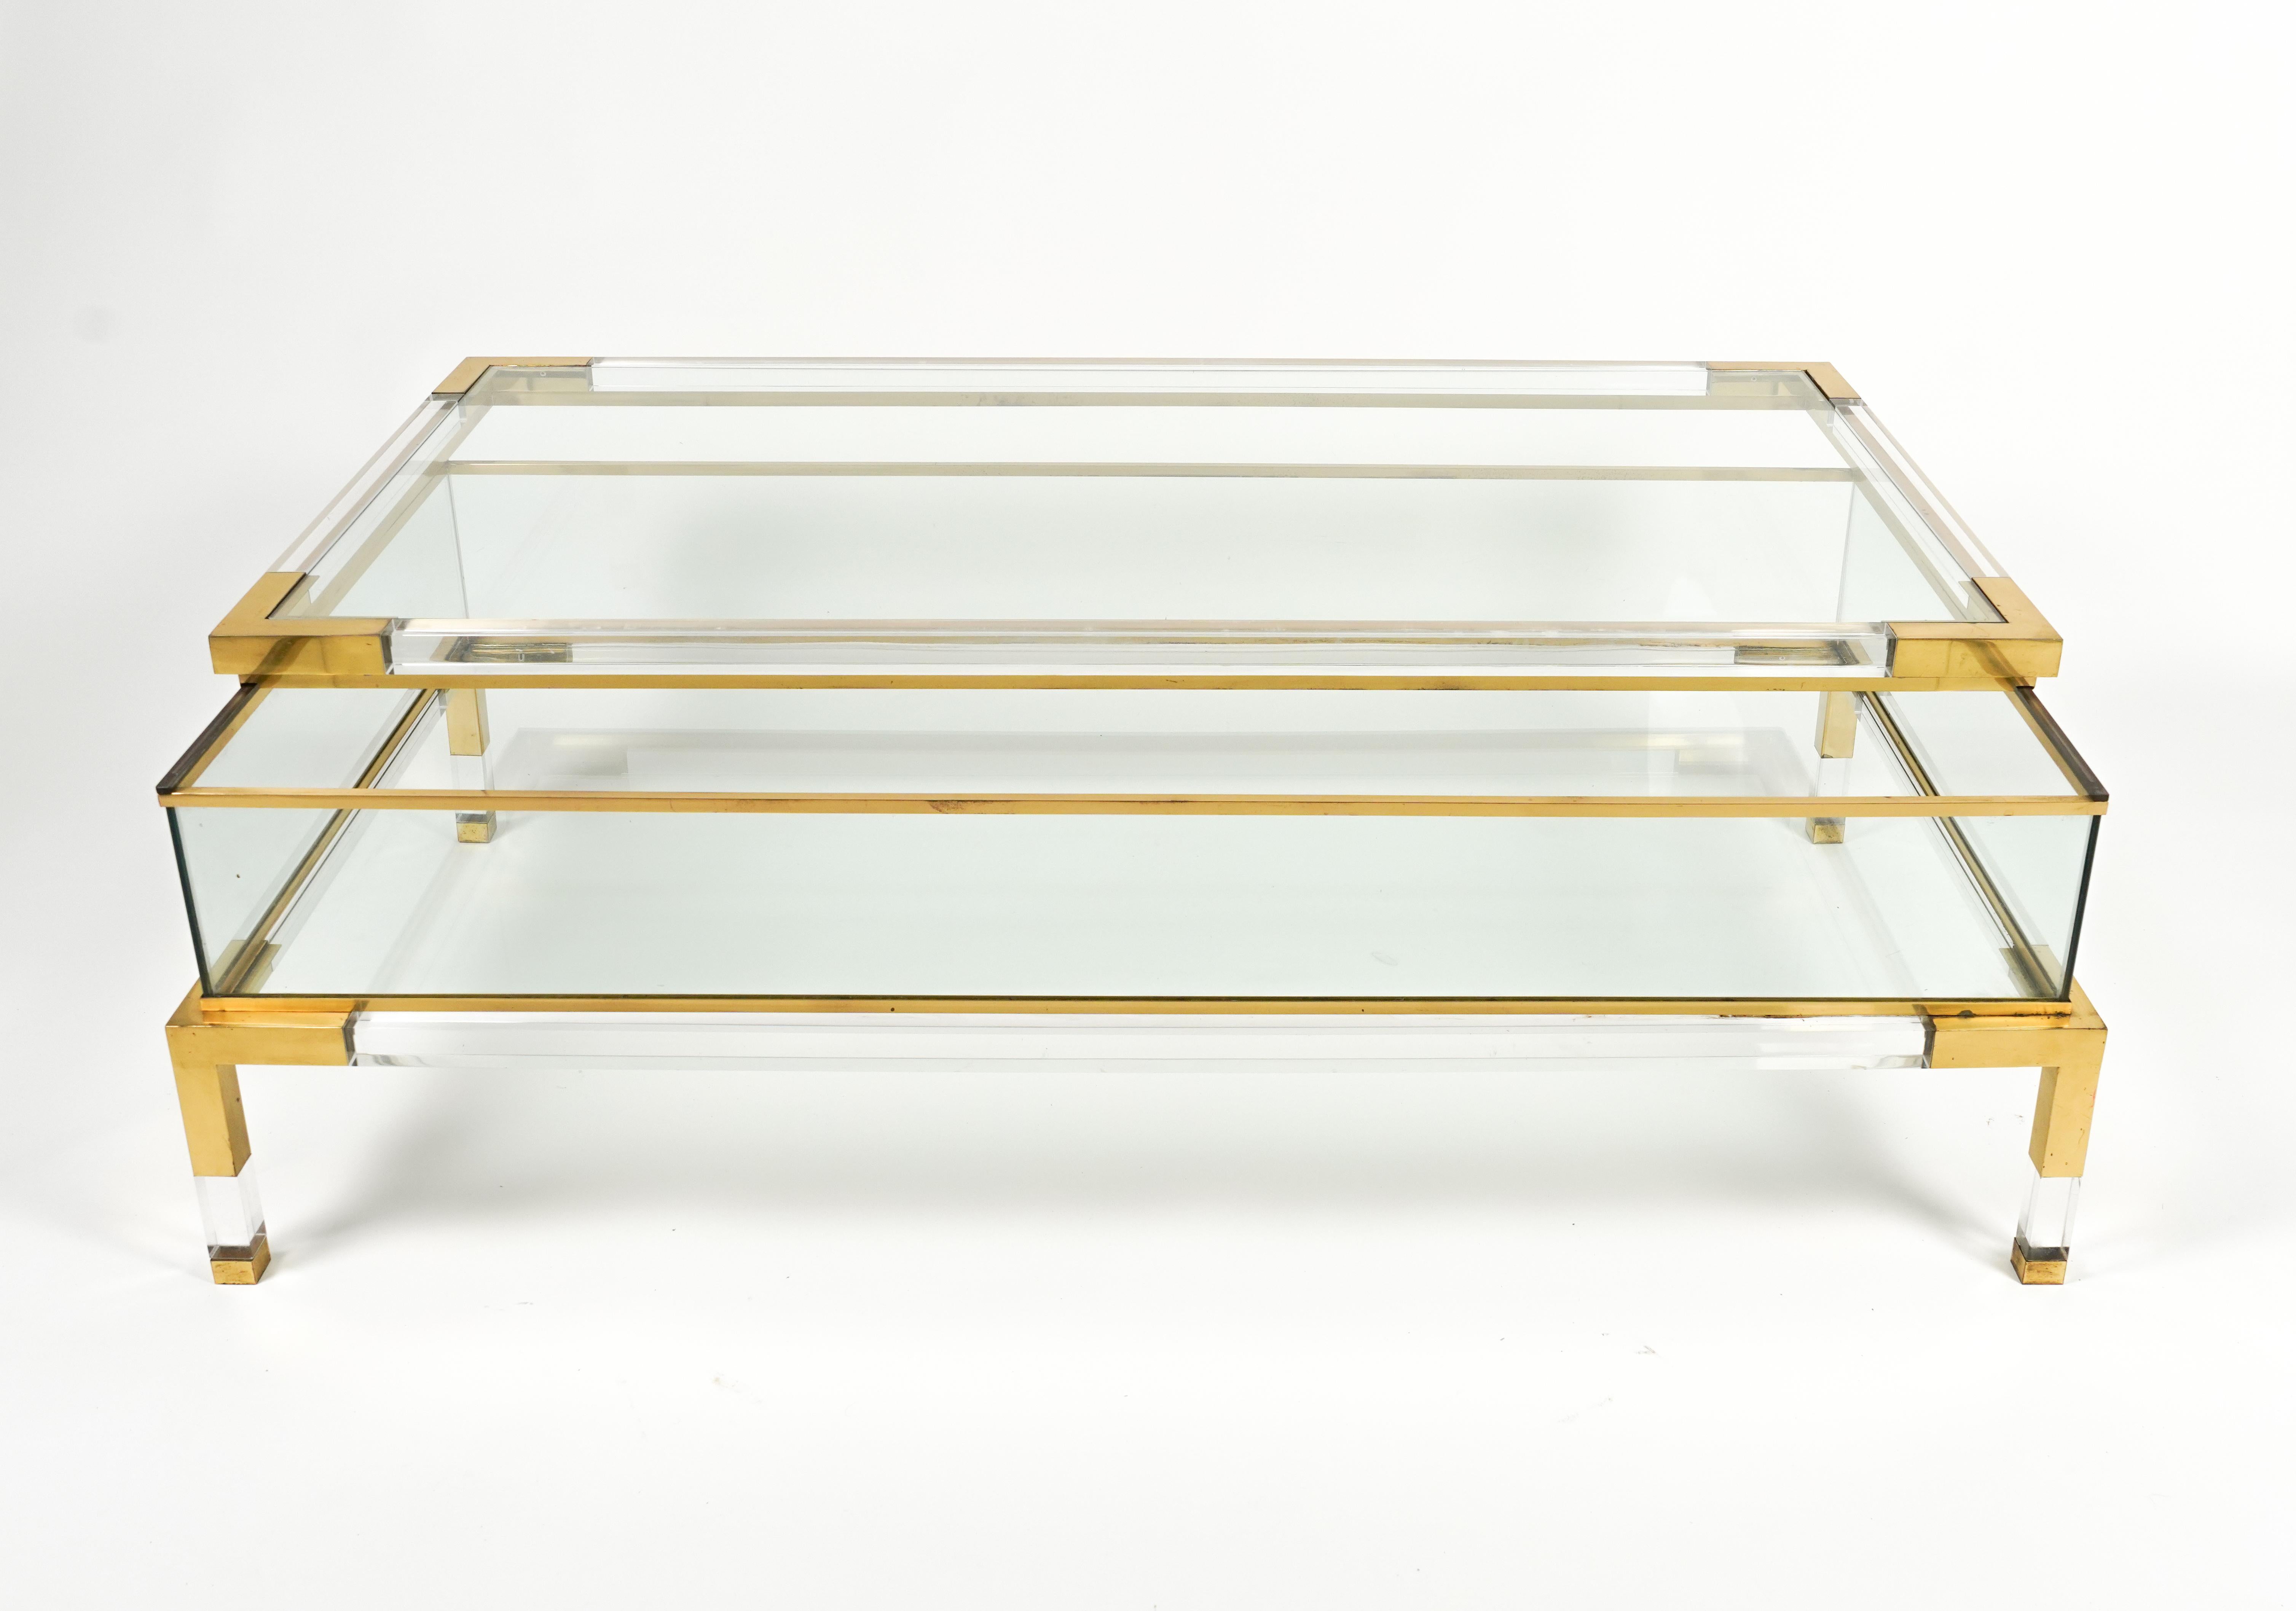 French Midcentury Coffee Table in Lucite, Brass & Glass by Maison Jansen, France 1970s For Sale